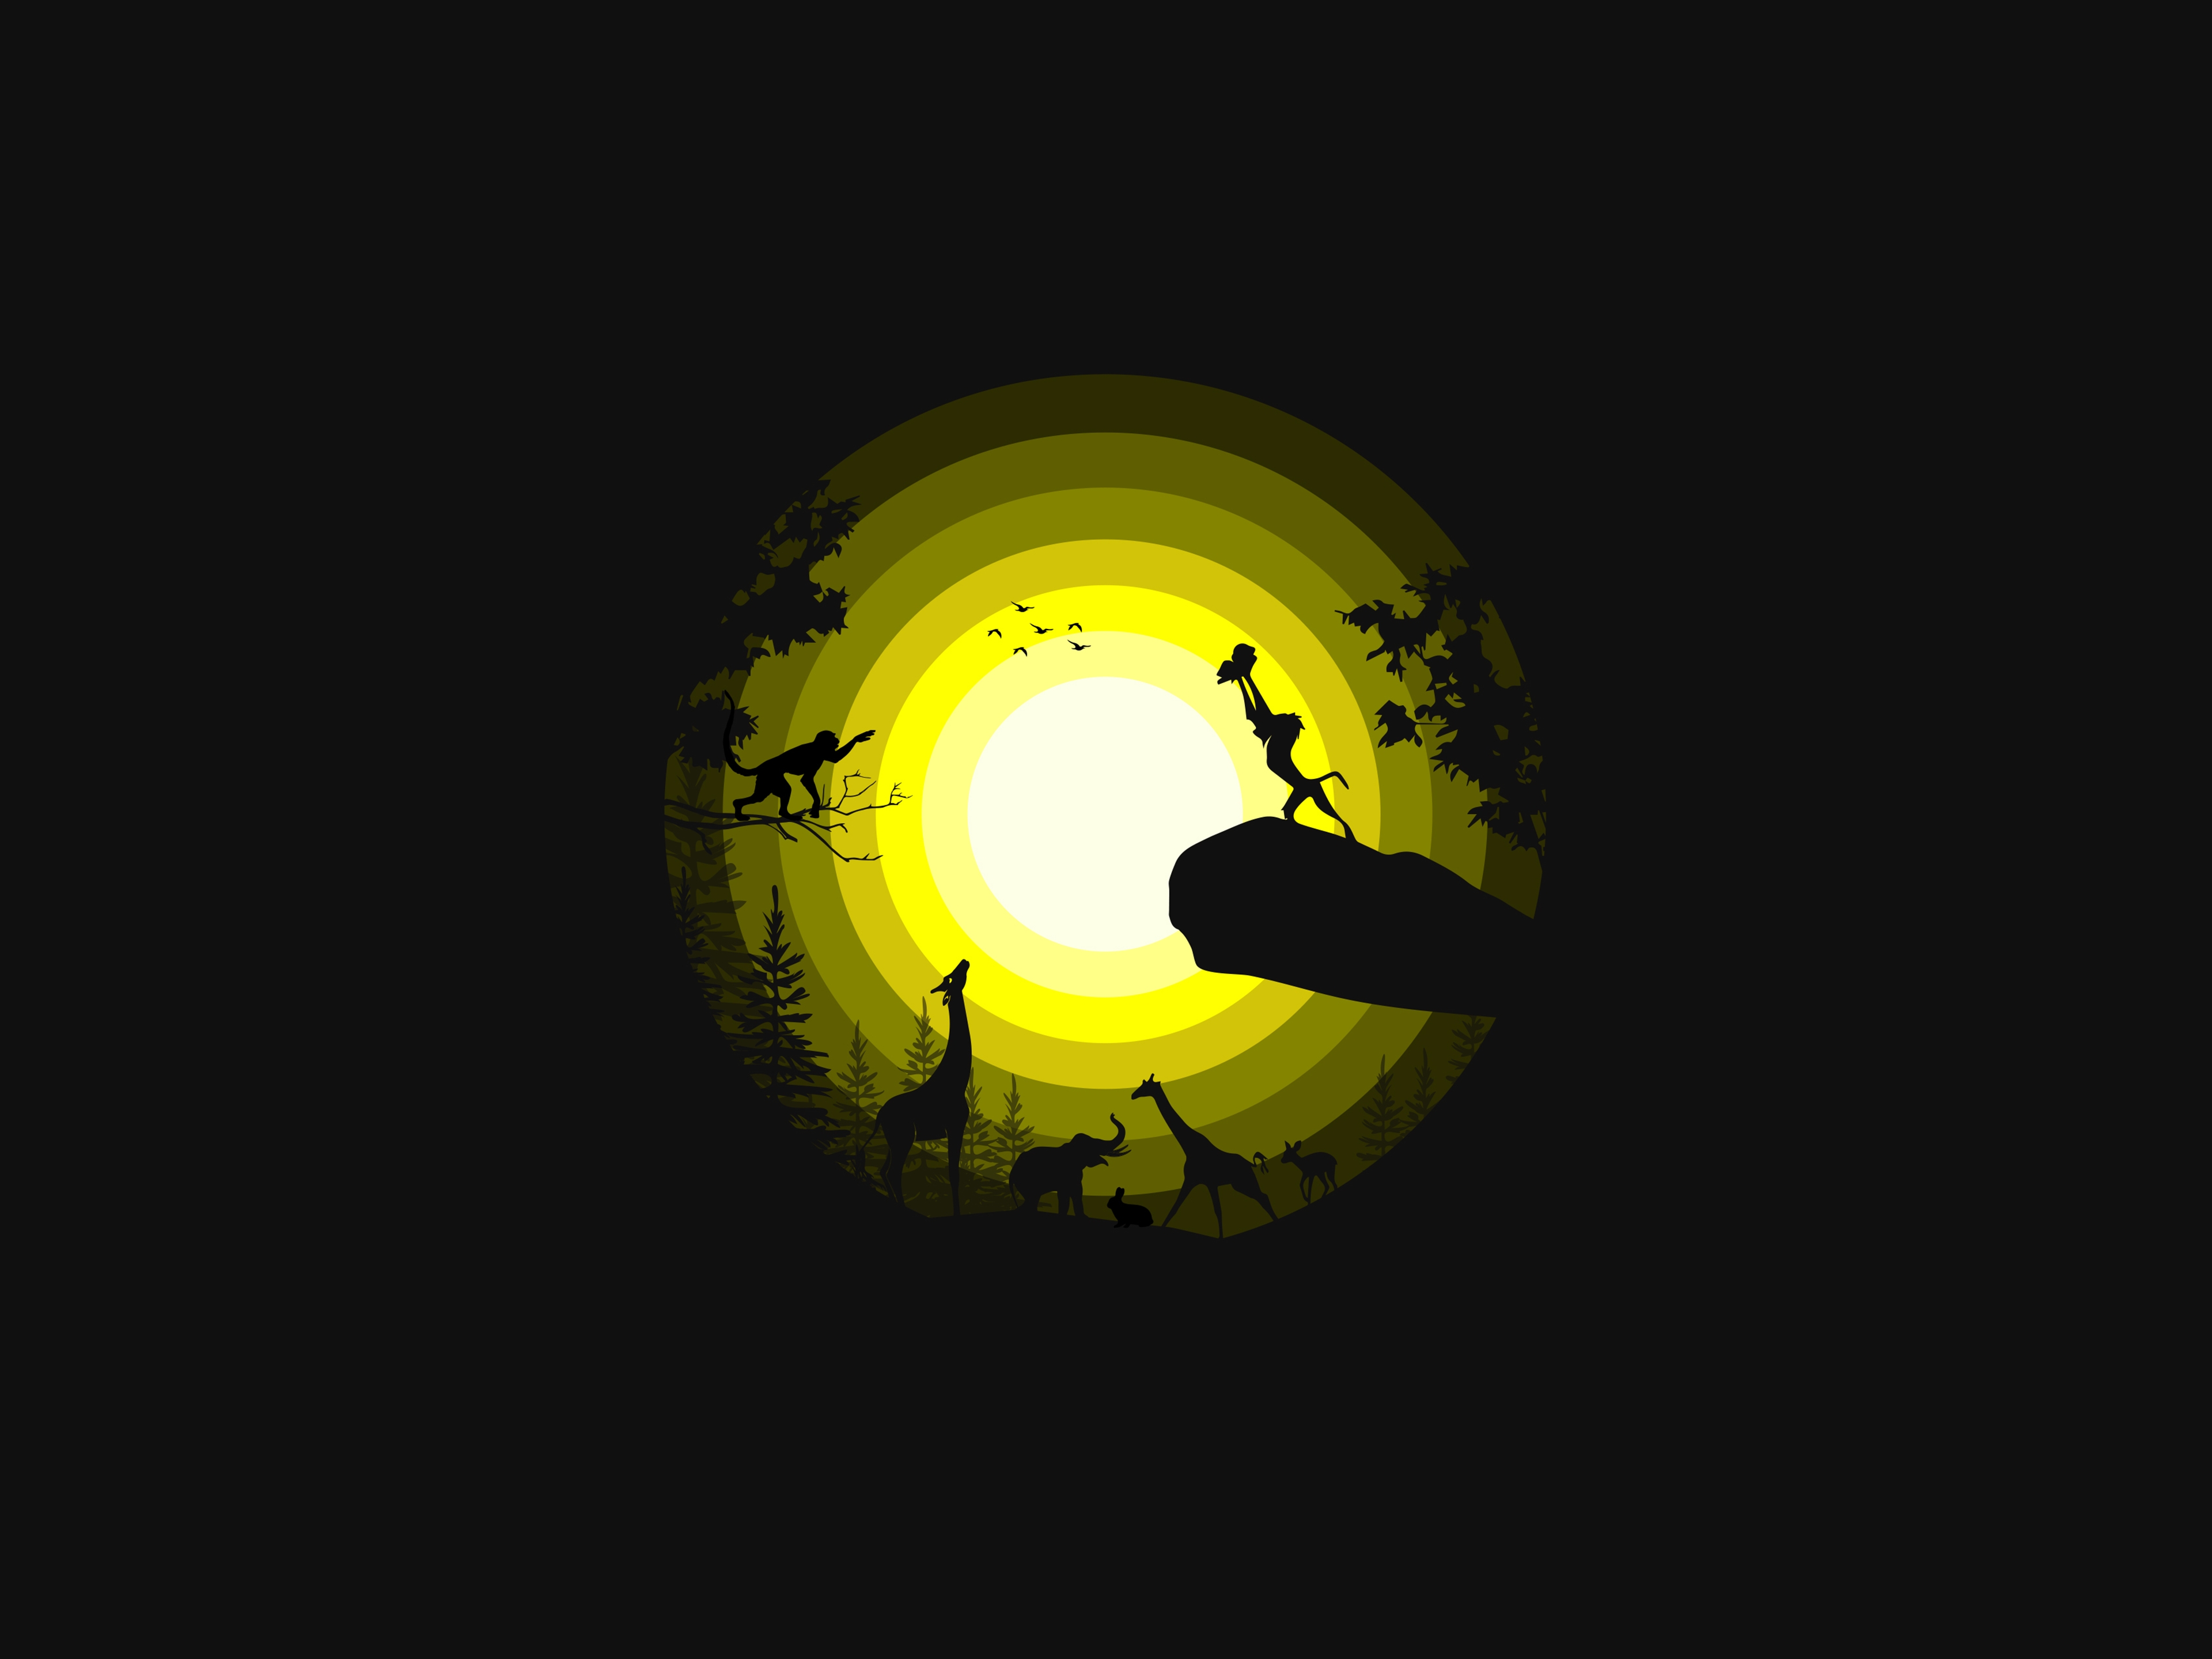 HD wallpaper, Black Background, The Lion King, Forest, Simple, Silhouette, Rafiki, Pride Rock, Simba, Yellow